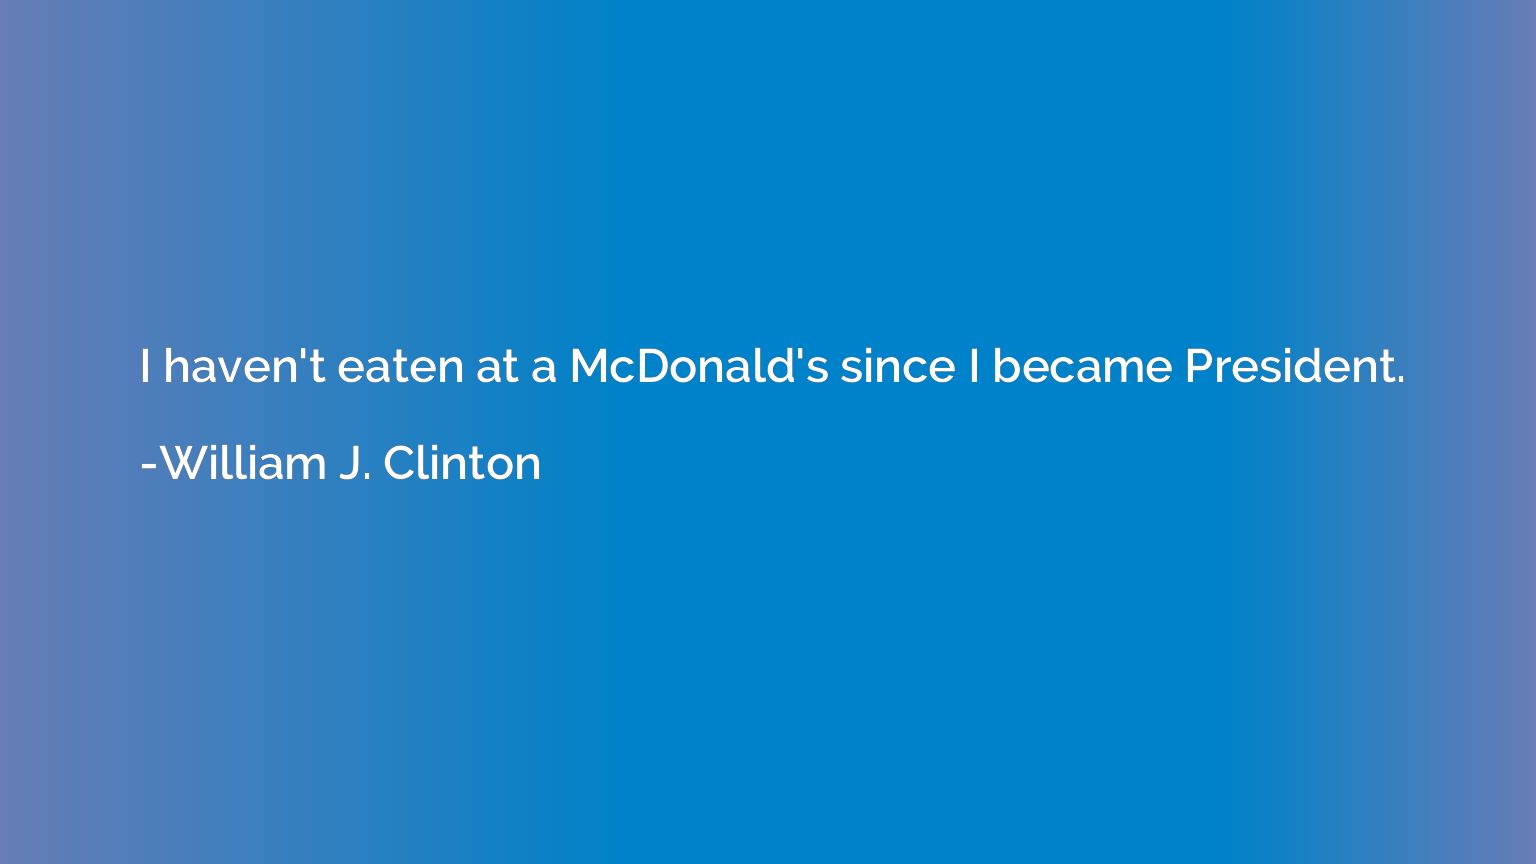 I haven't eaten at a McDonald's since I became President.